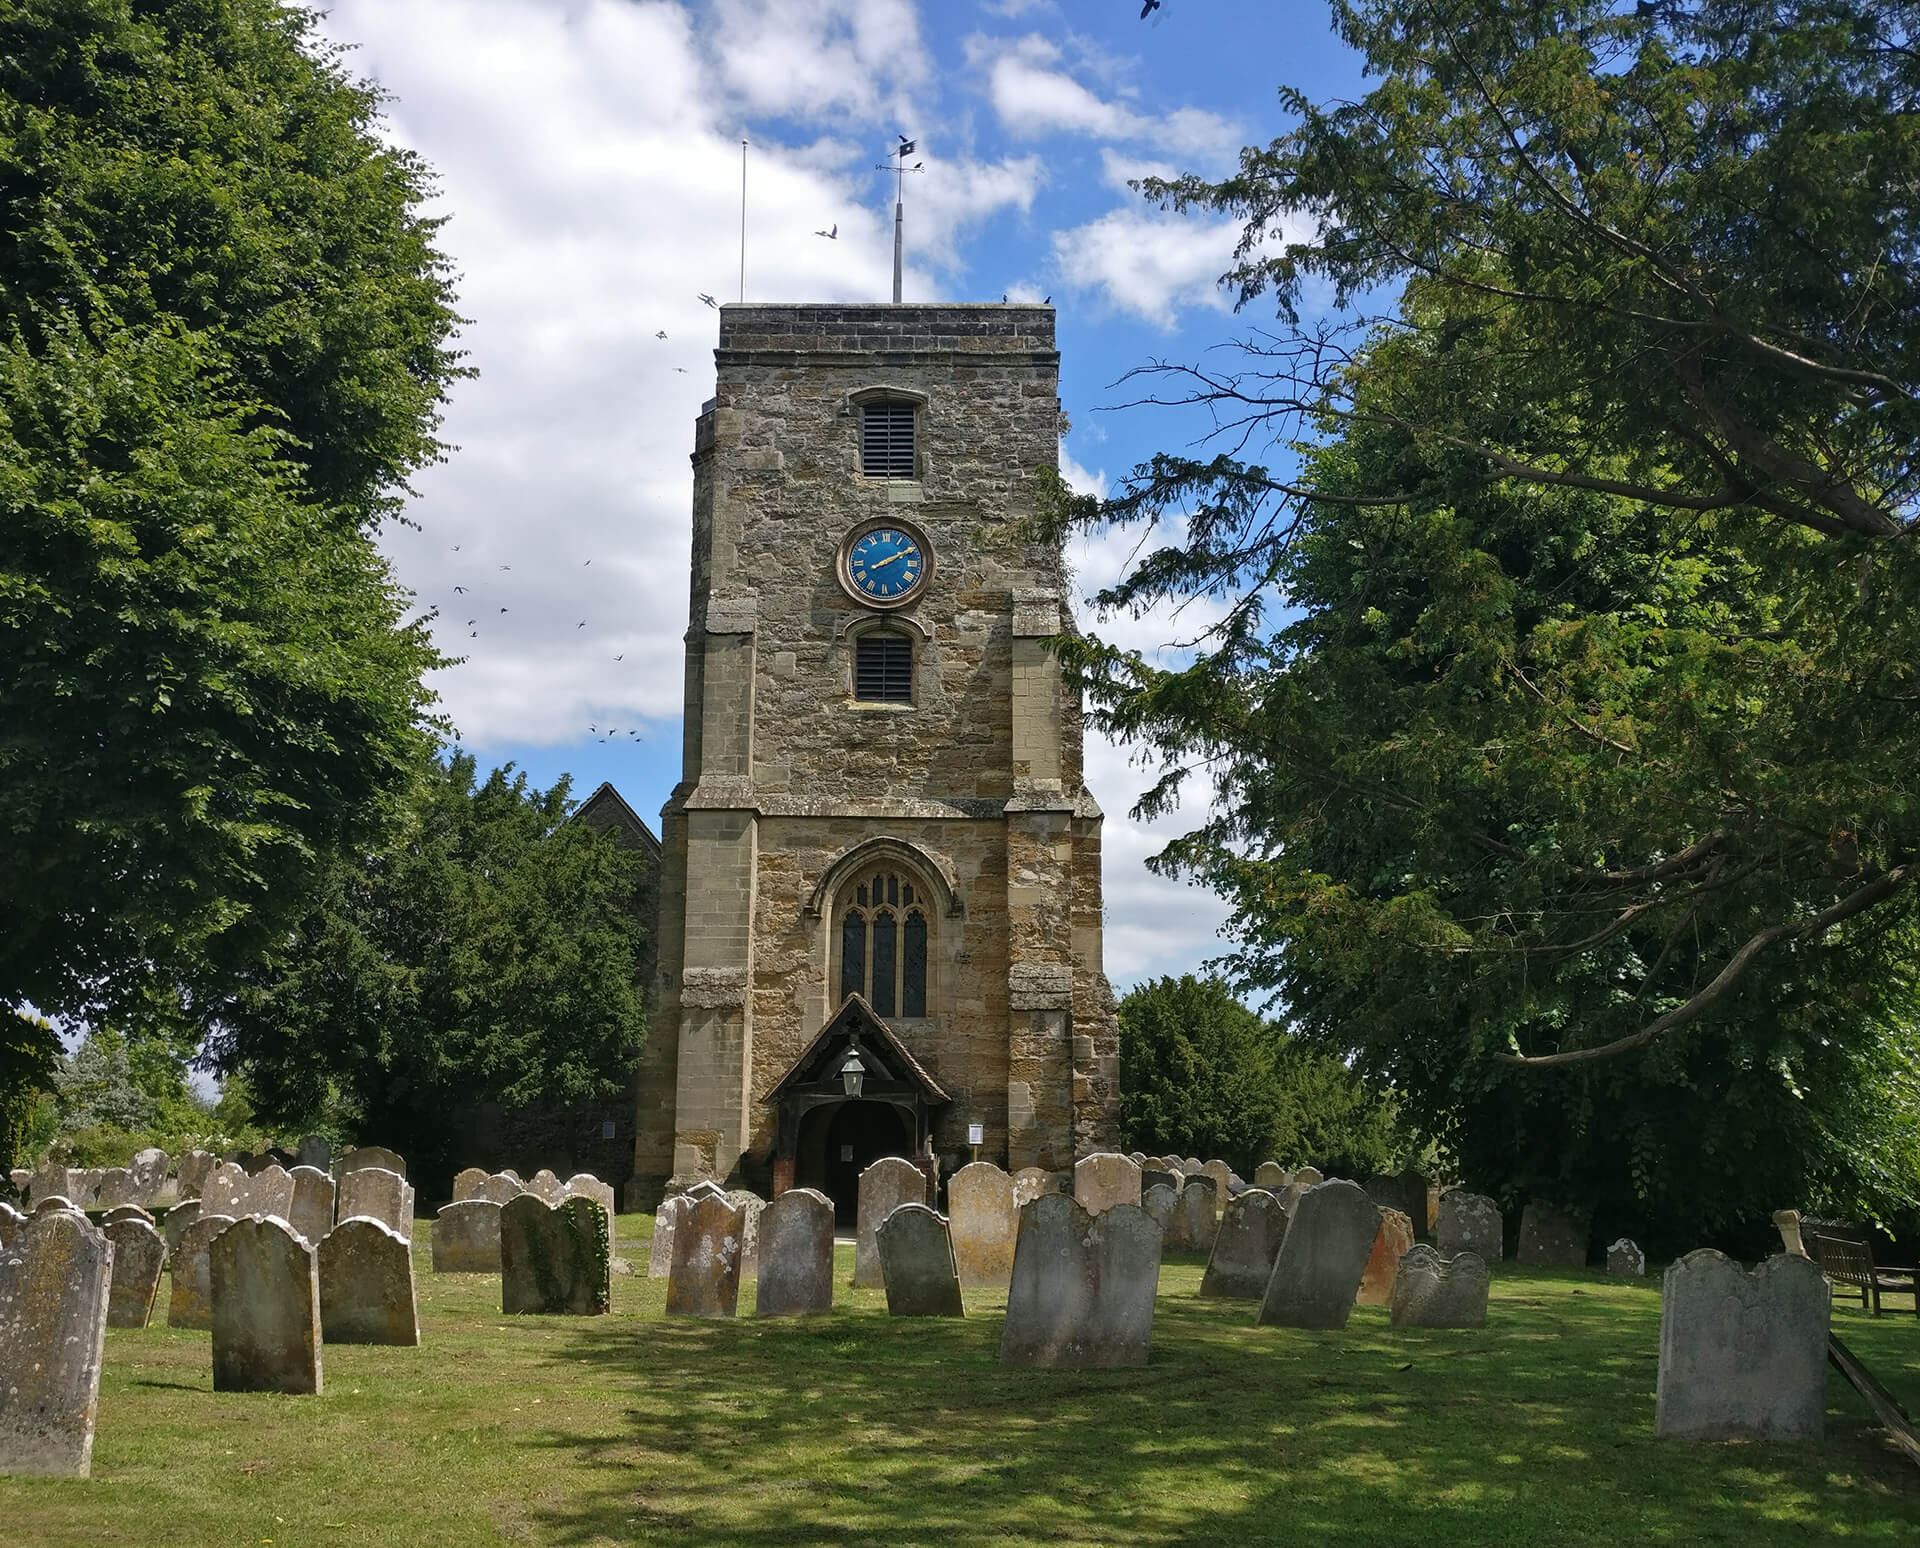 View of the tower at St John the Baptist, Kirdford